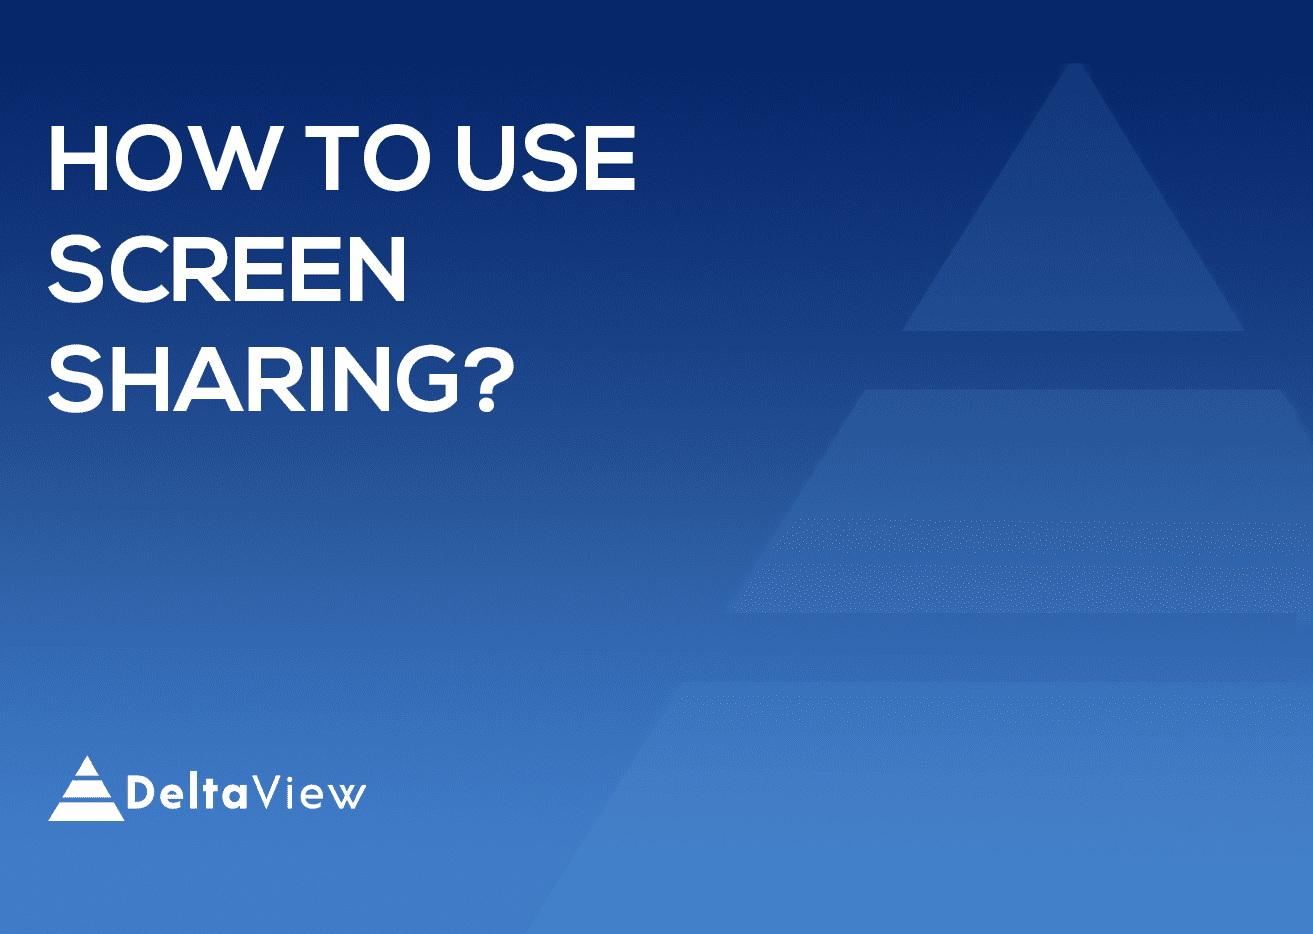 How to use screen sharing?